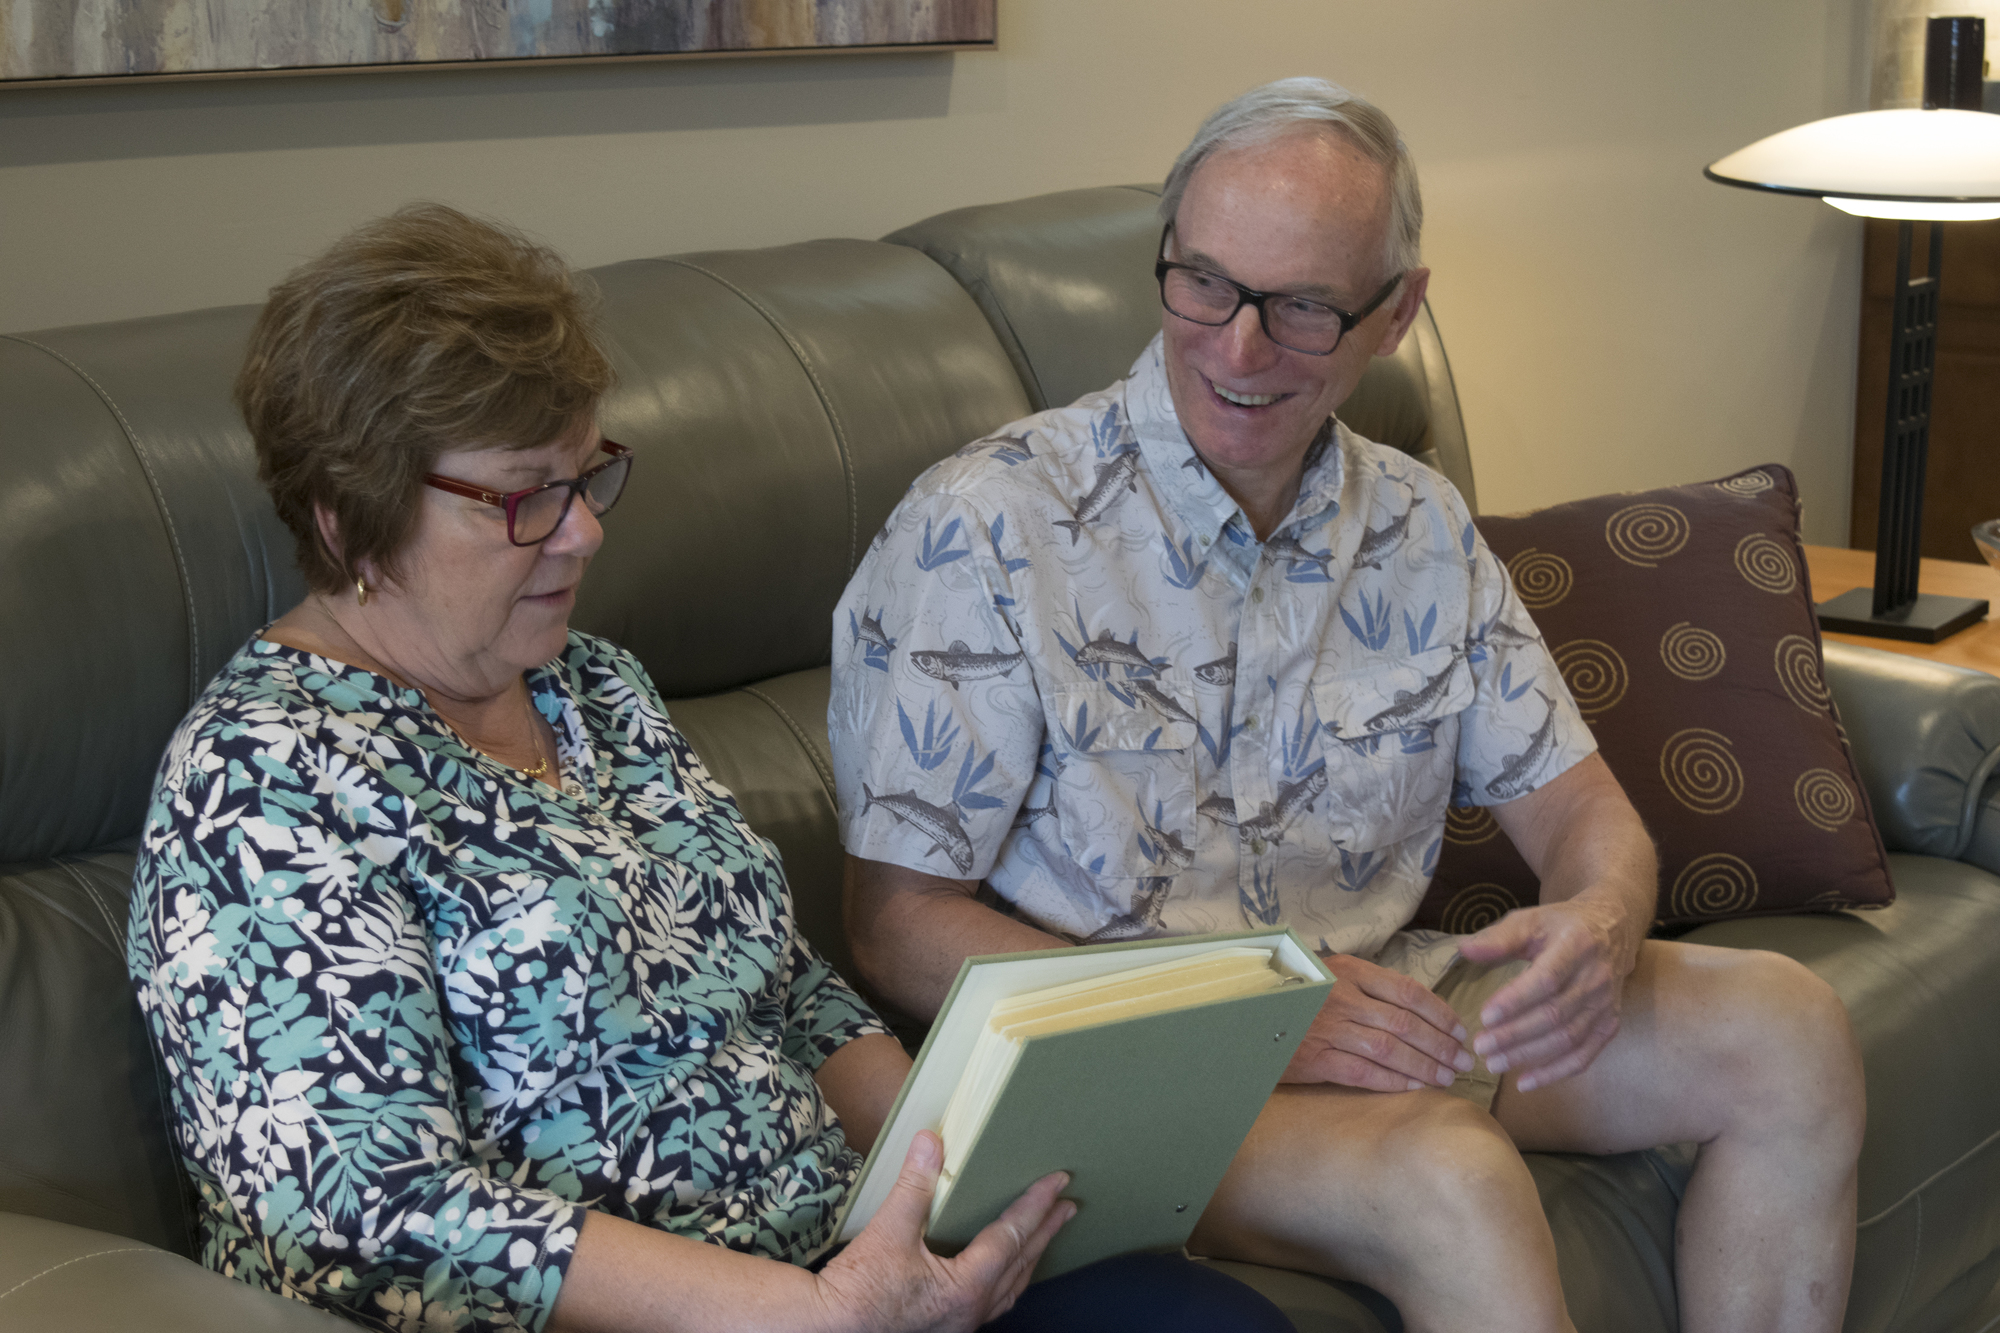 As Gary’s care advocate, Theresa takes comfort in the support she and Gary receive through Neuro Challenge Foundation for Parkinson’s. Gary and Theresa have been married for 47 years.